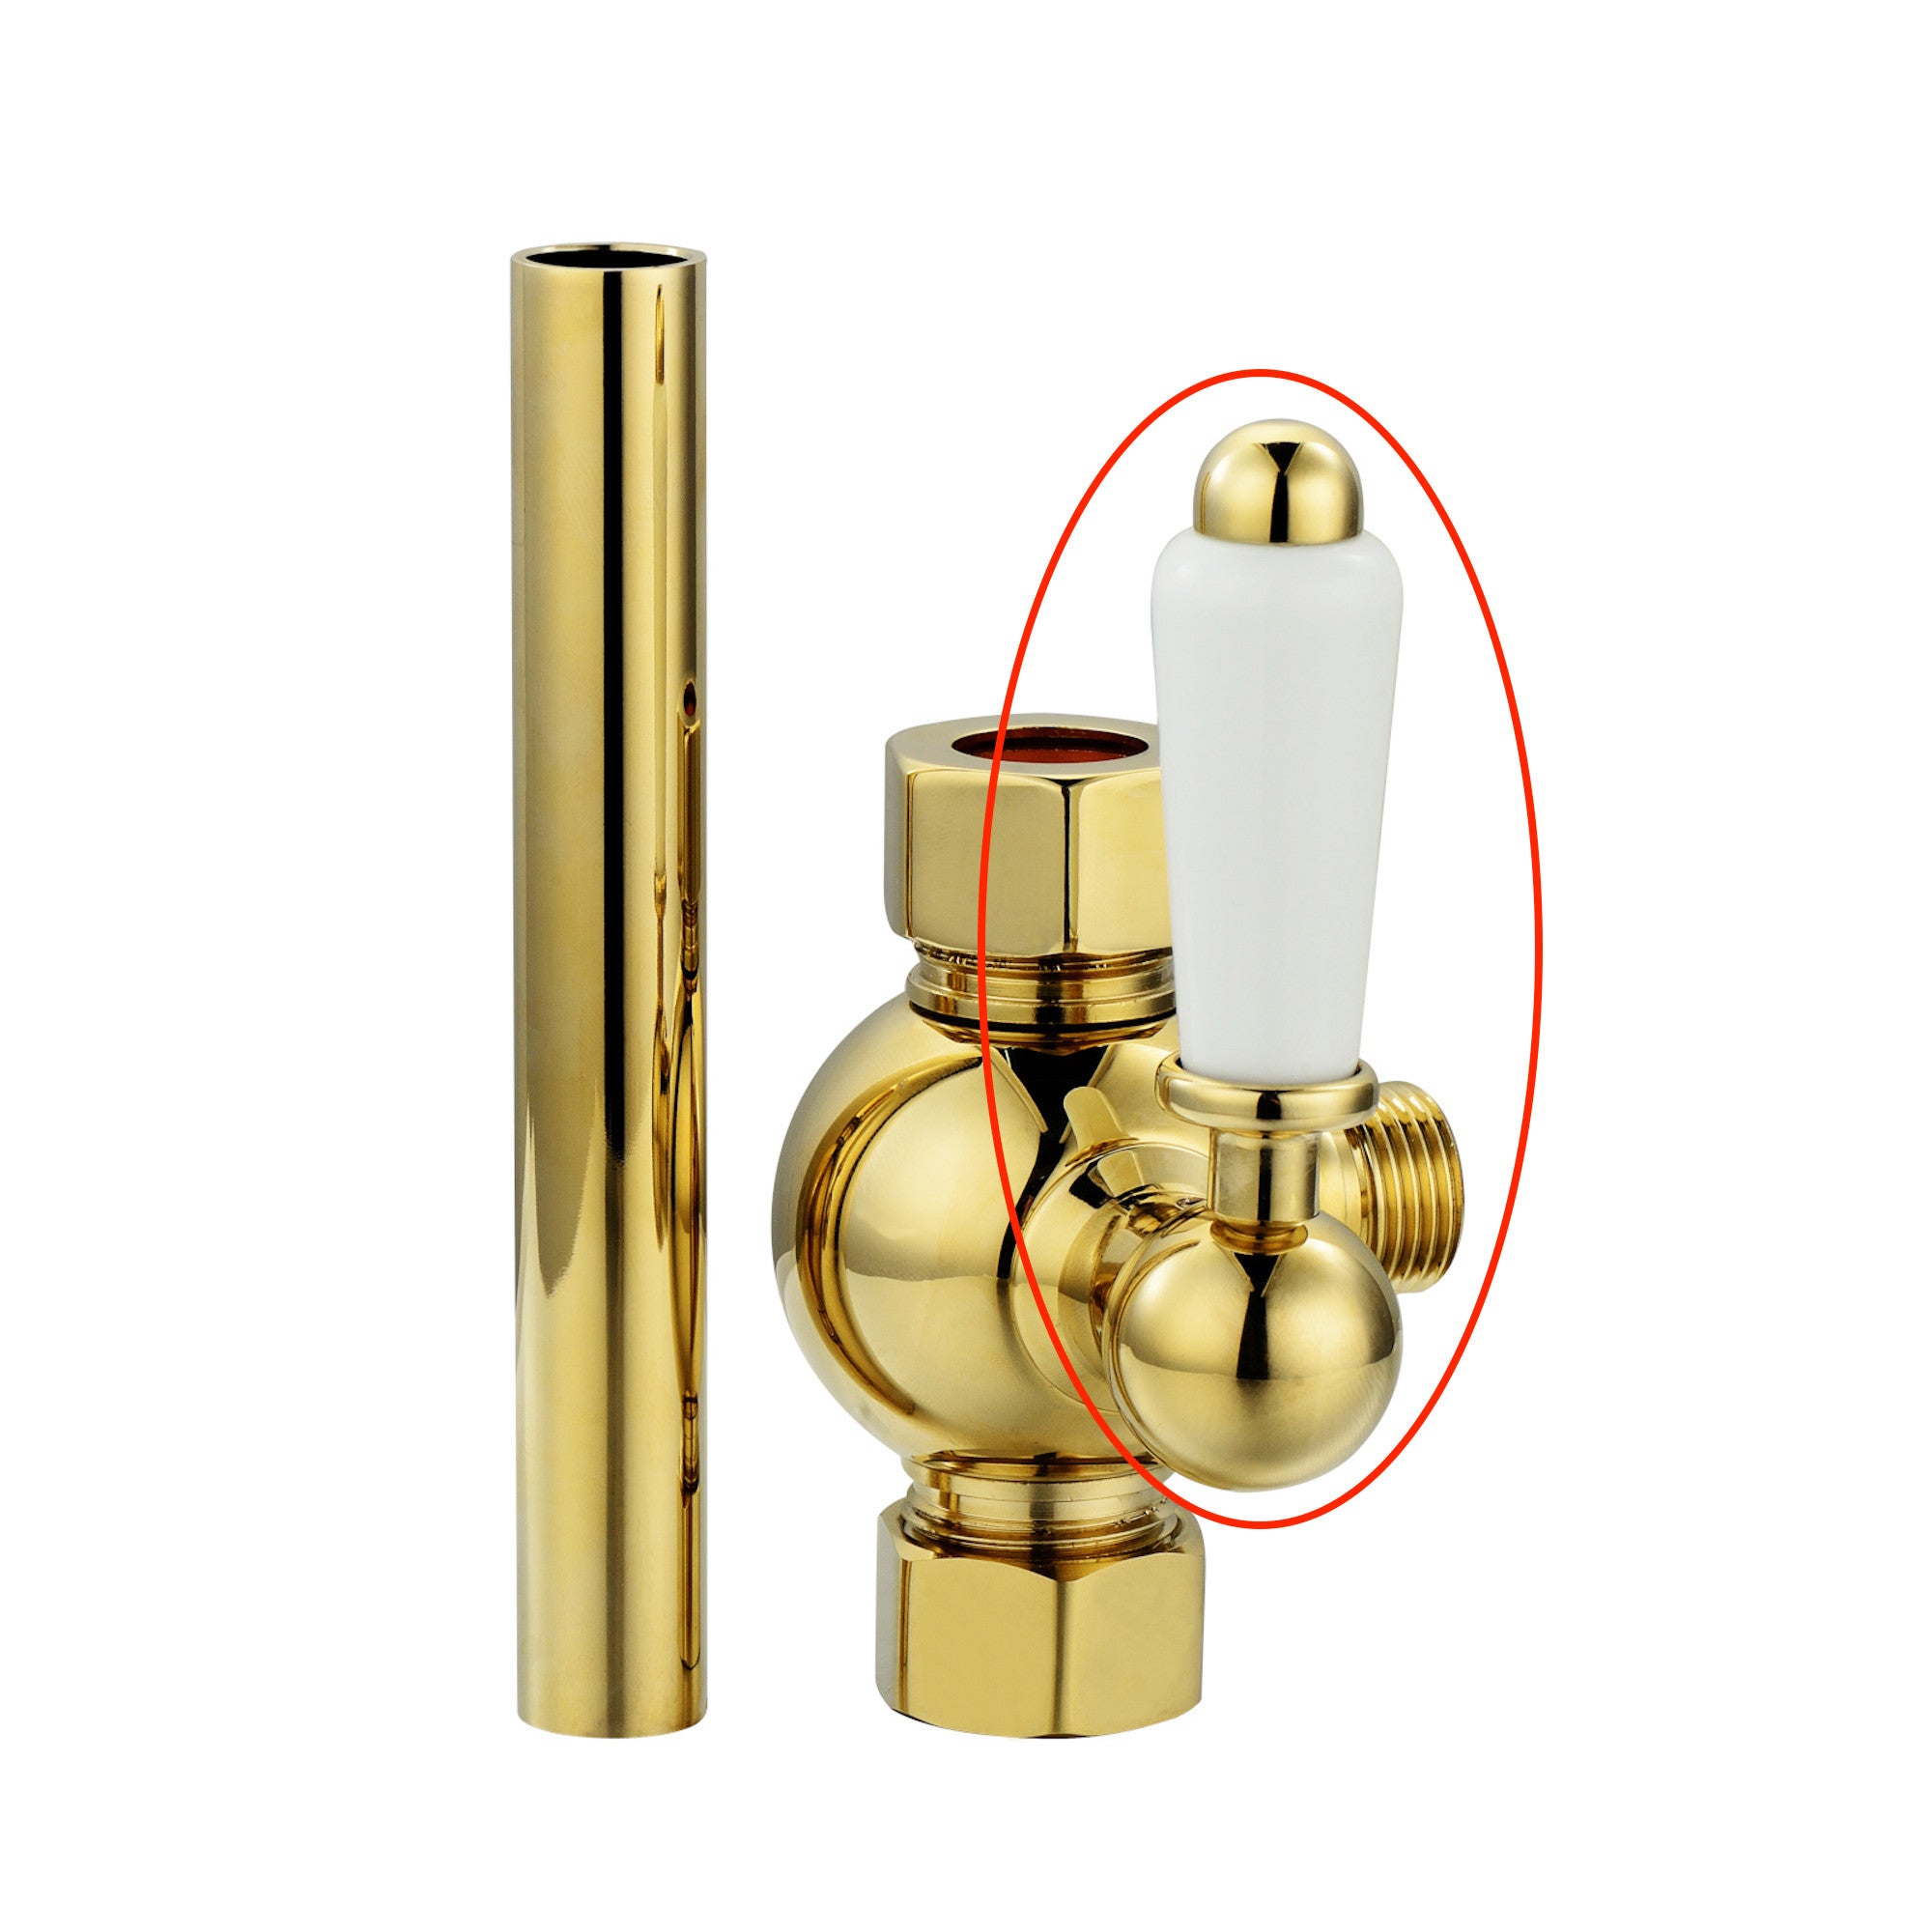 Replacement white ceramic lever with housing and grub screw for D06 - gold